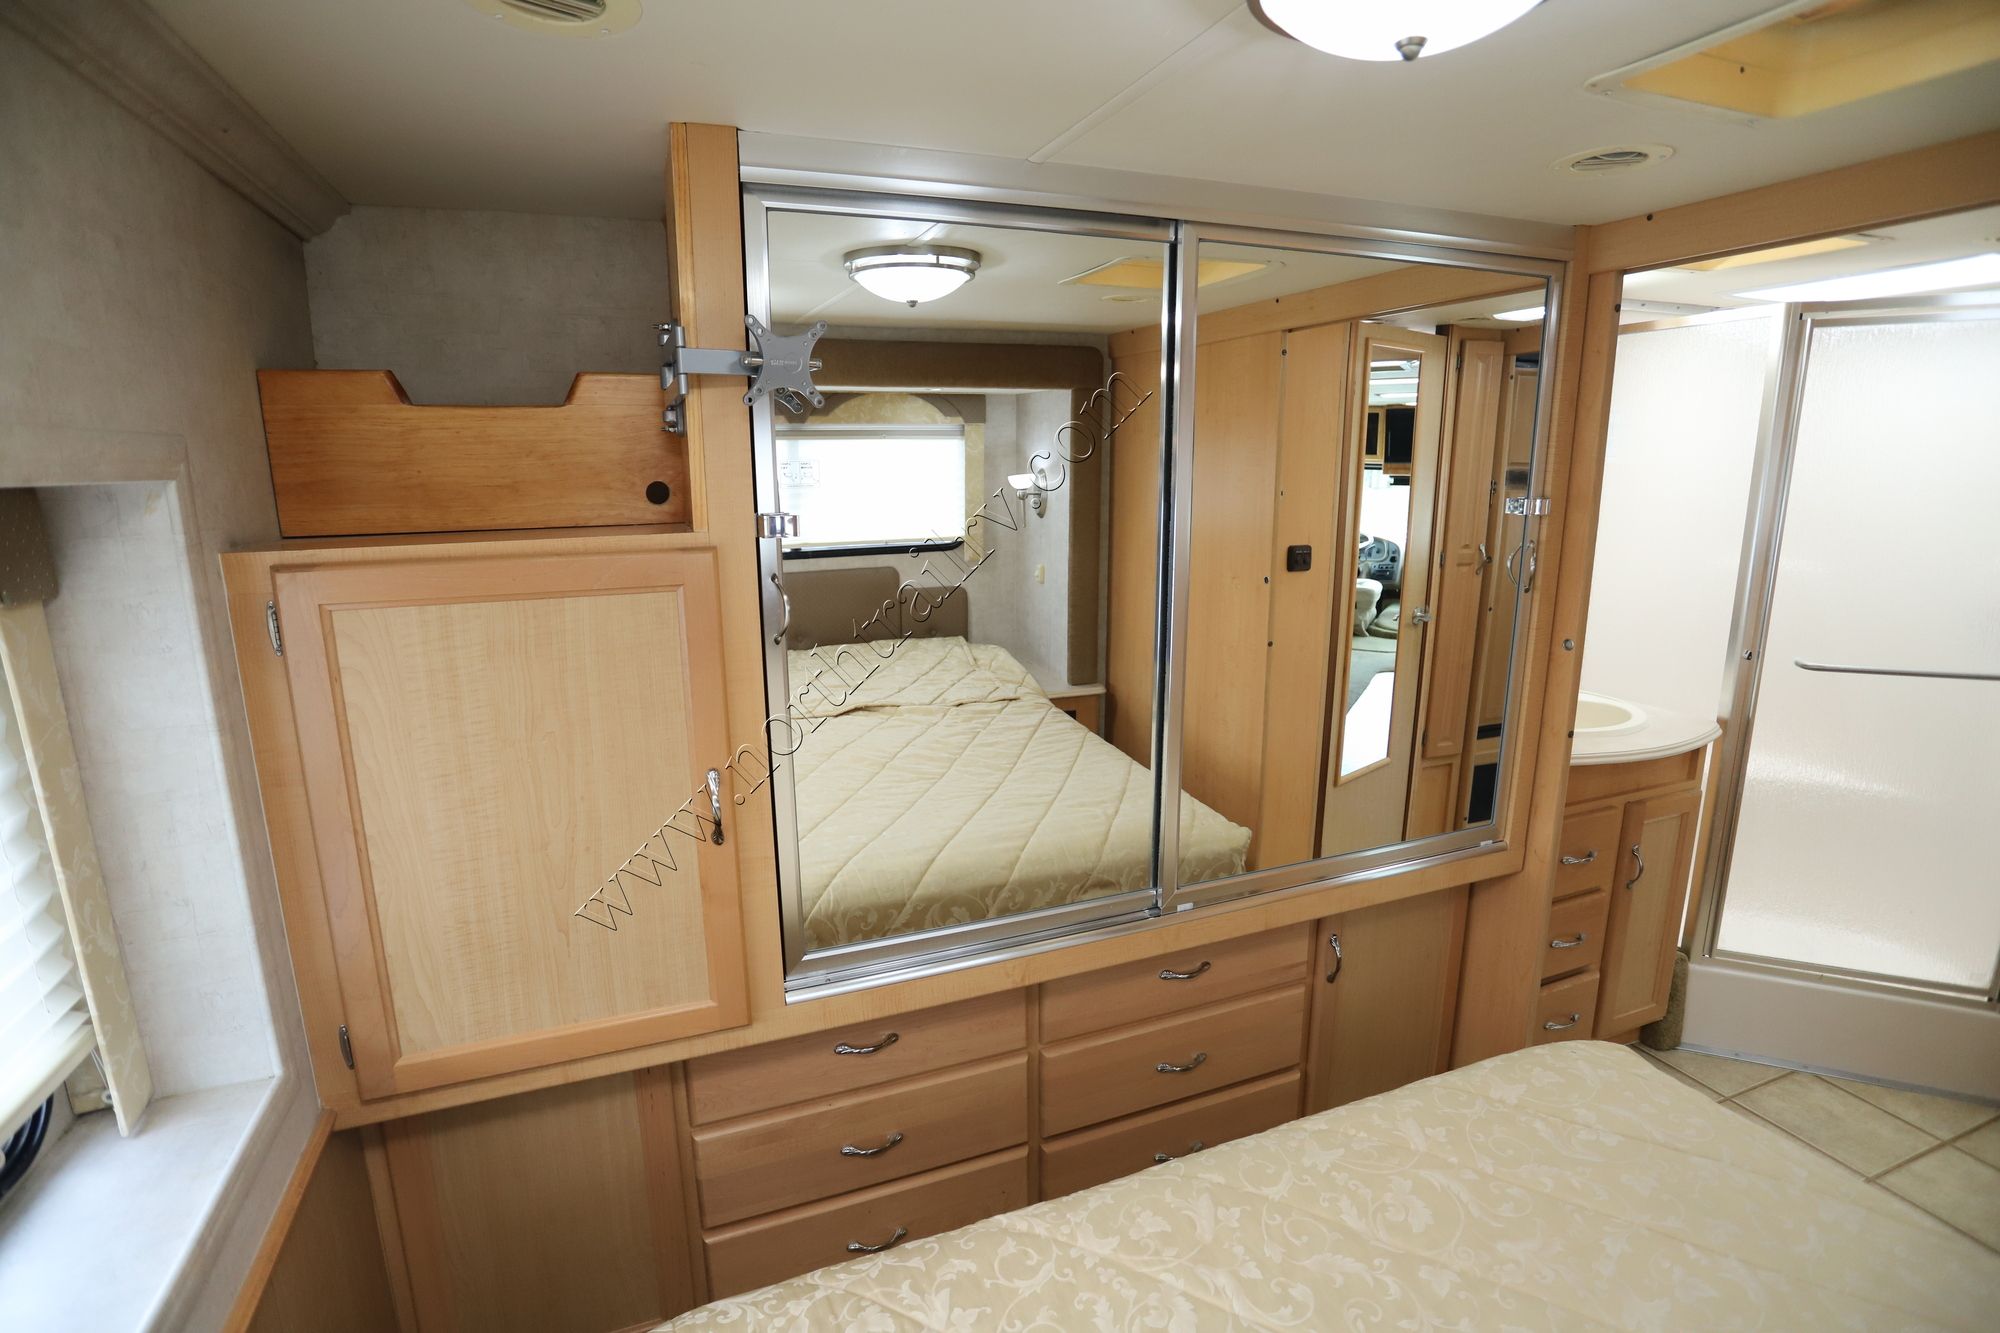 Used 2005 National Dolphin 5320 5320 Class A  For Sale